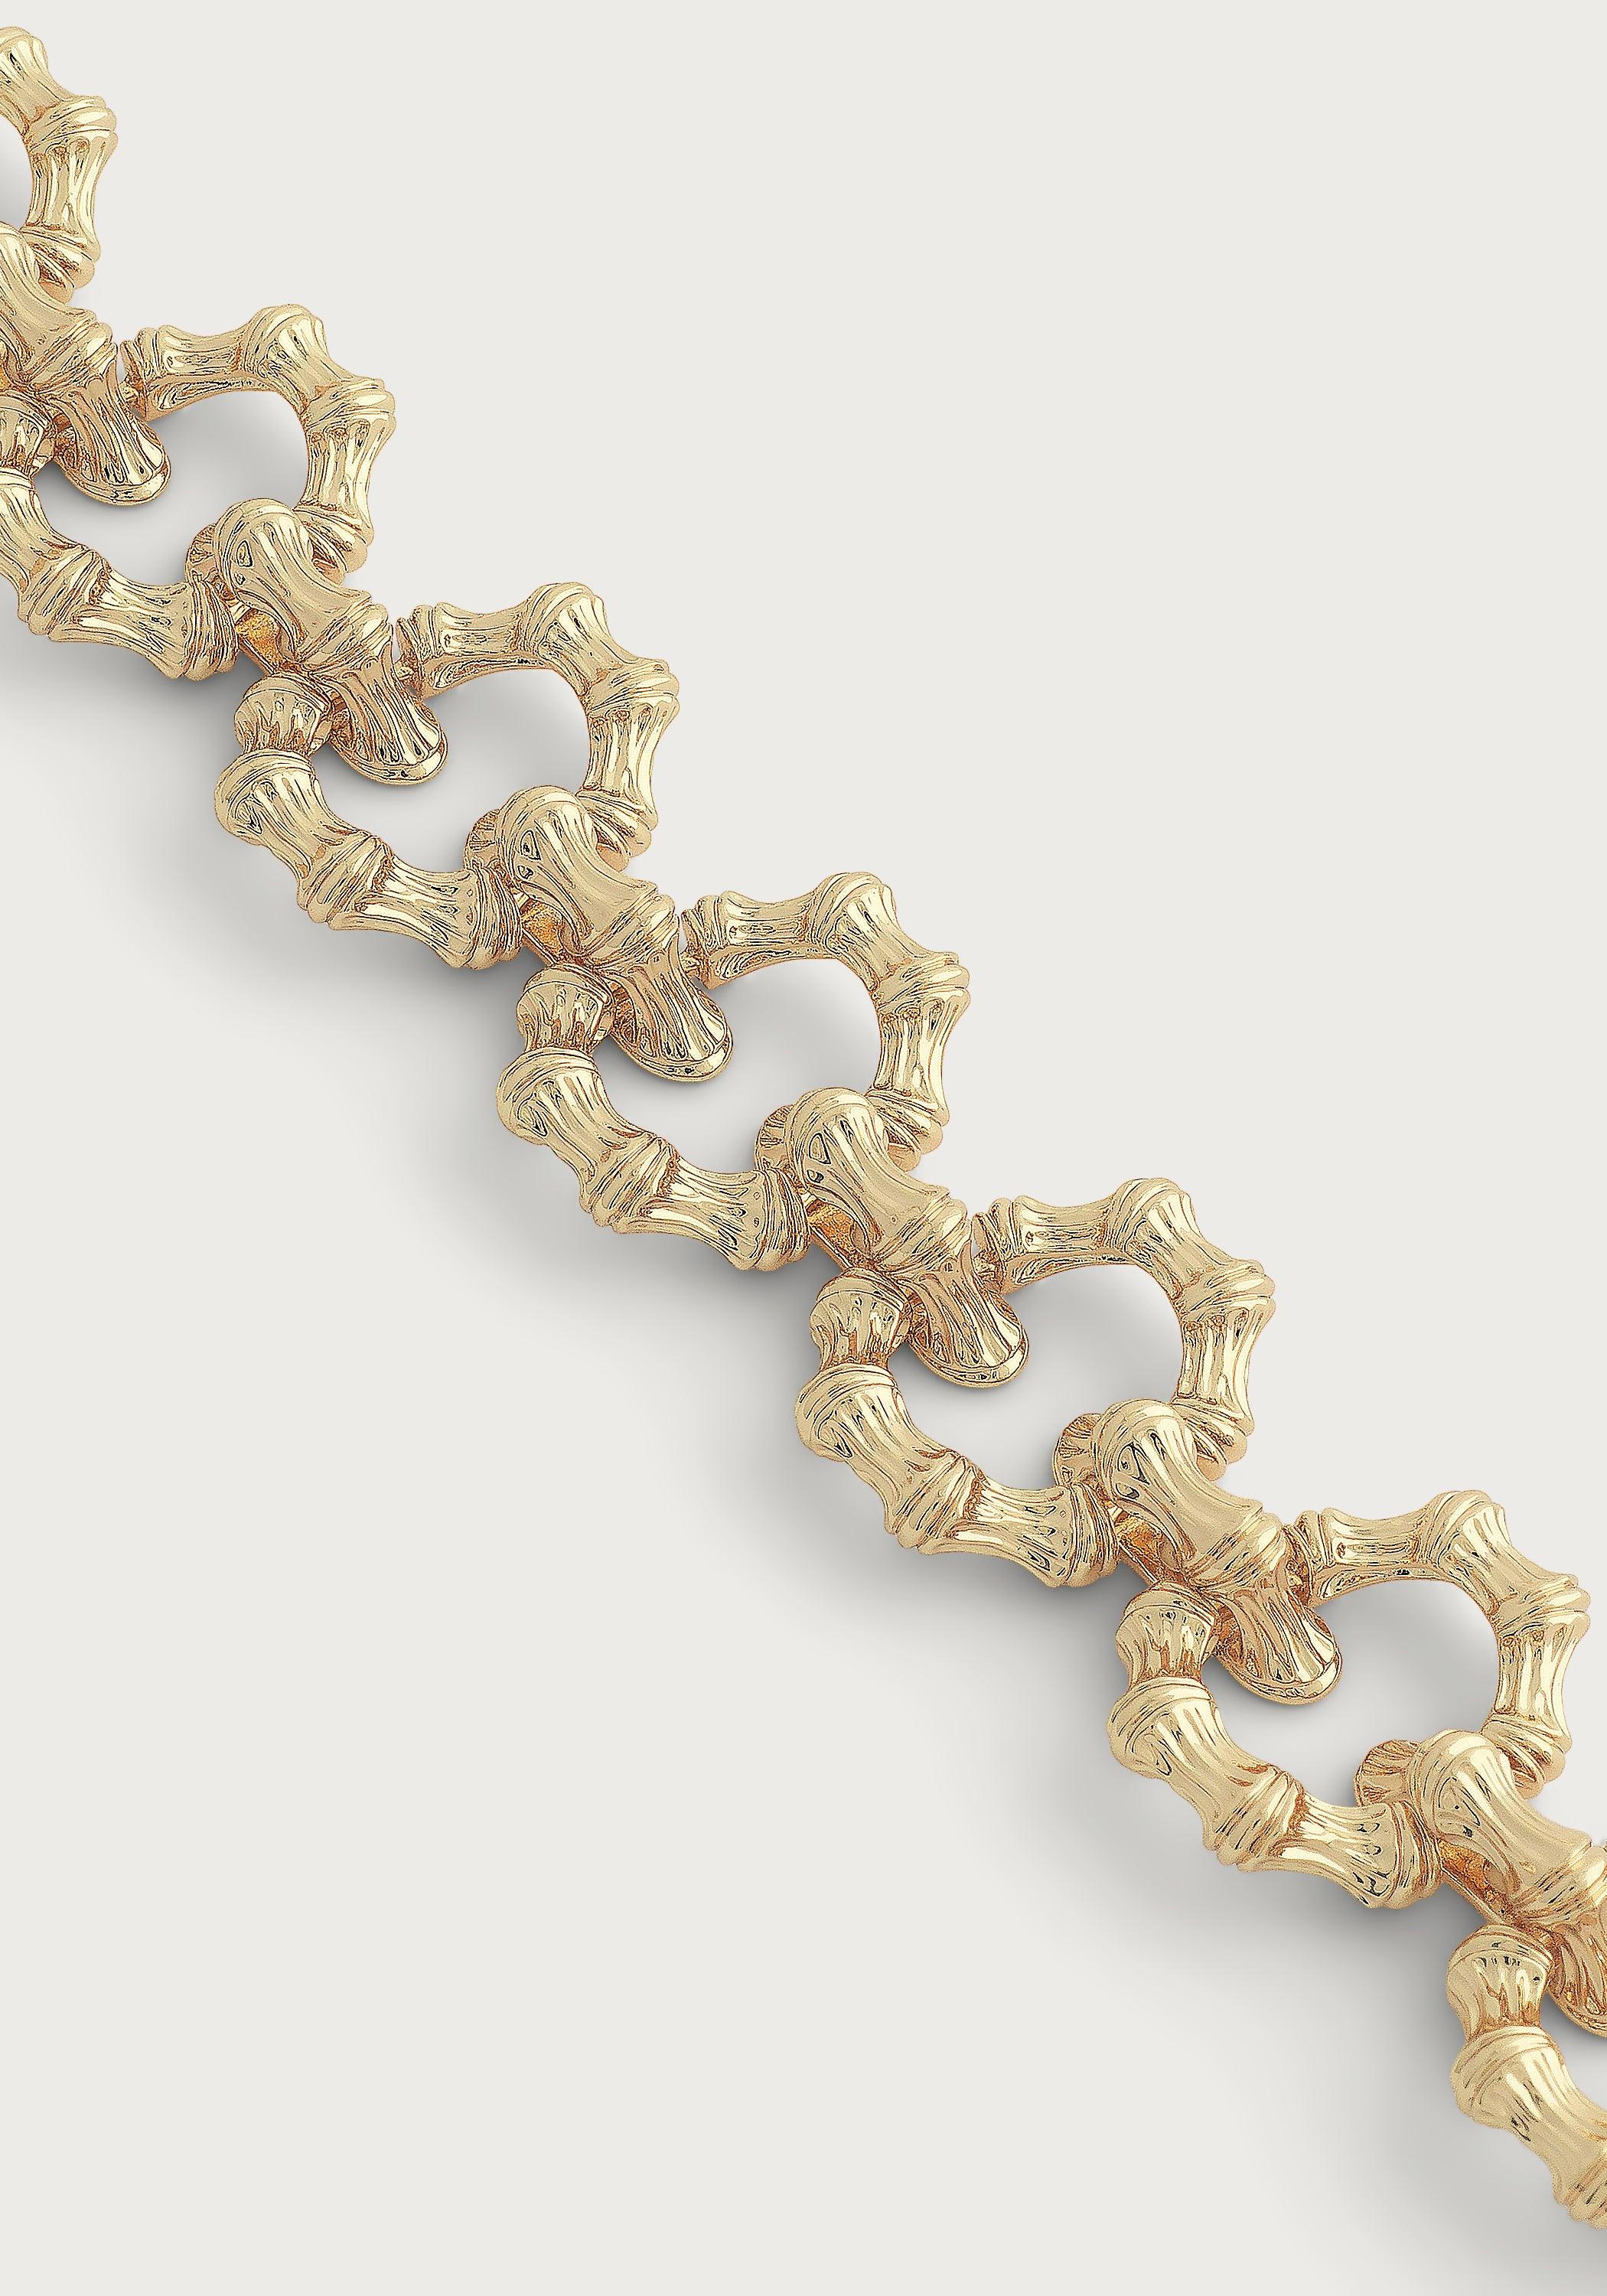 Bamboo Chain Necklace - Anabel Aram